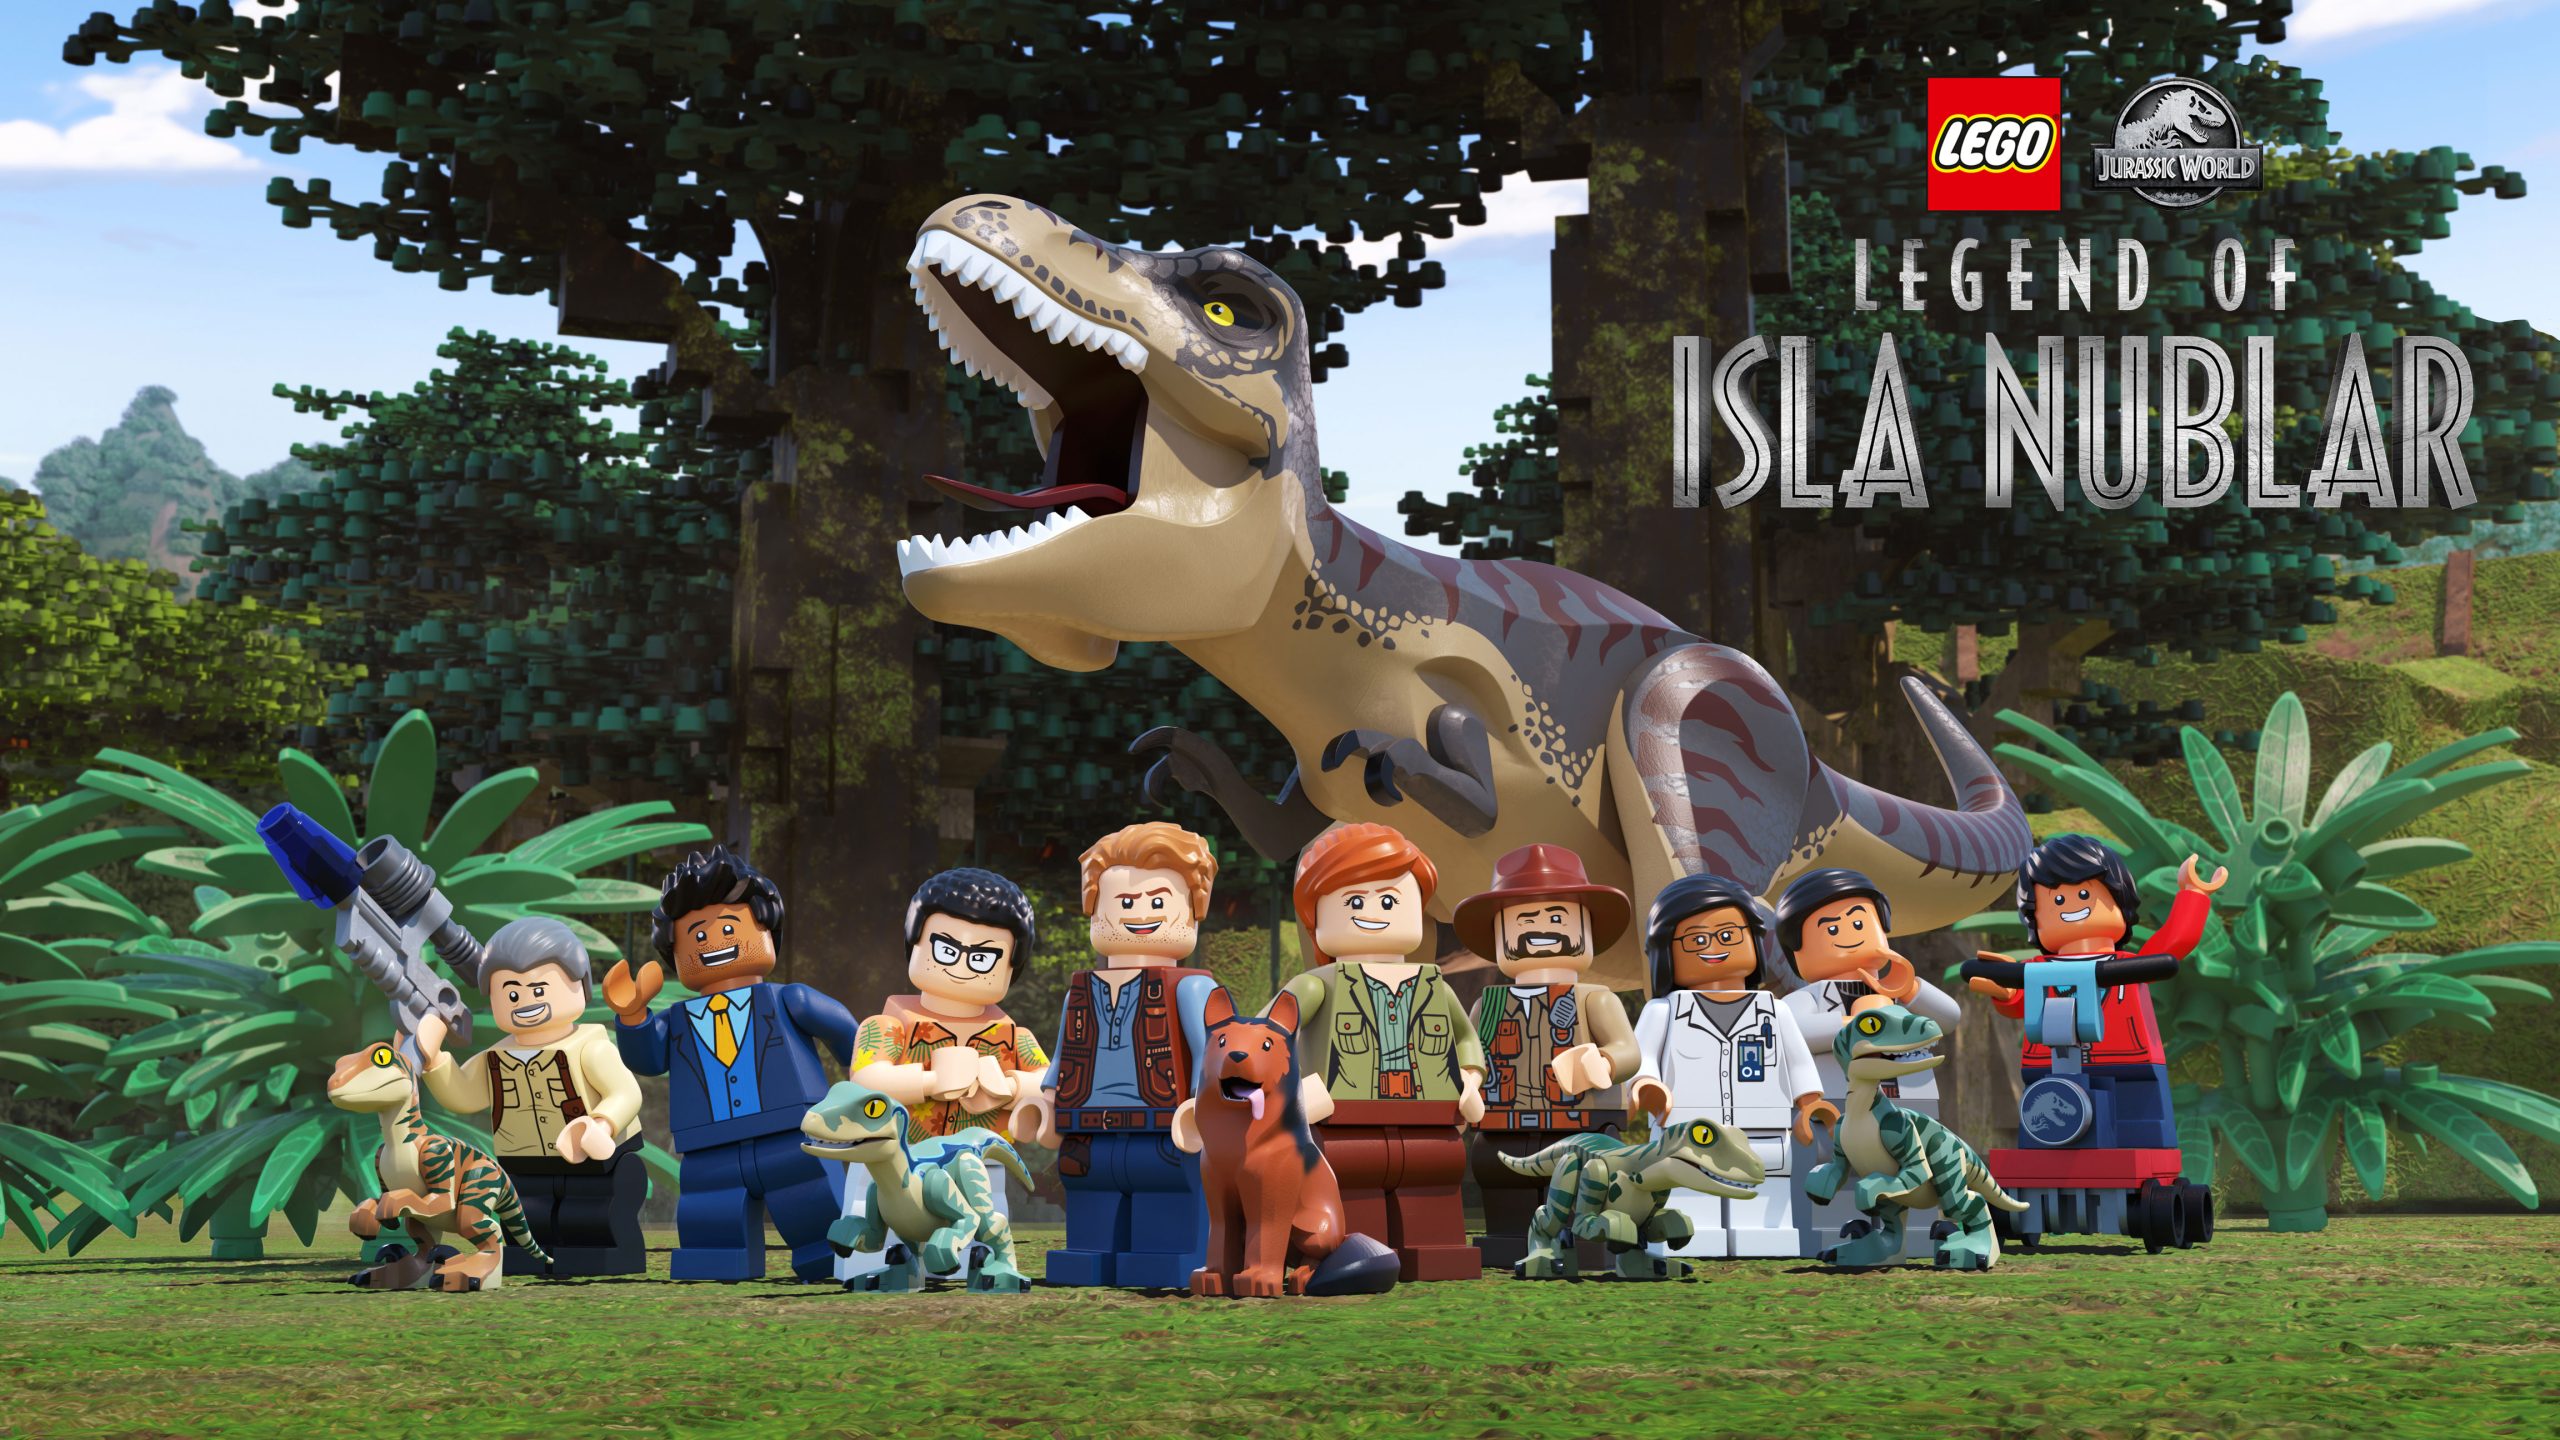 Lego Jurassic World is in continuity with Park Canon